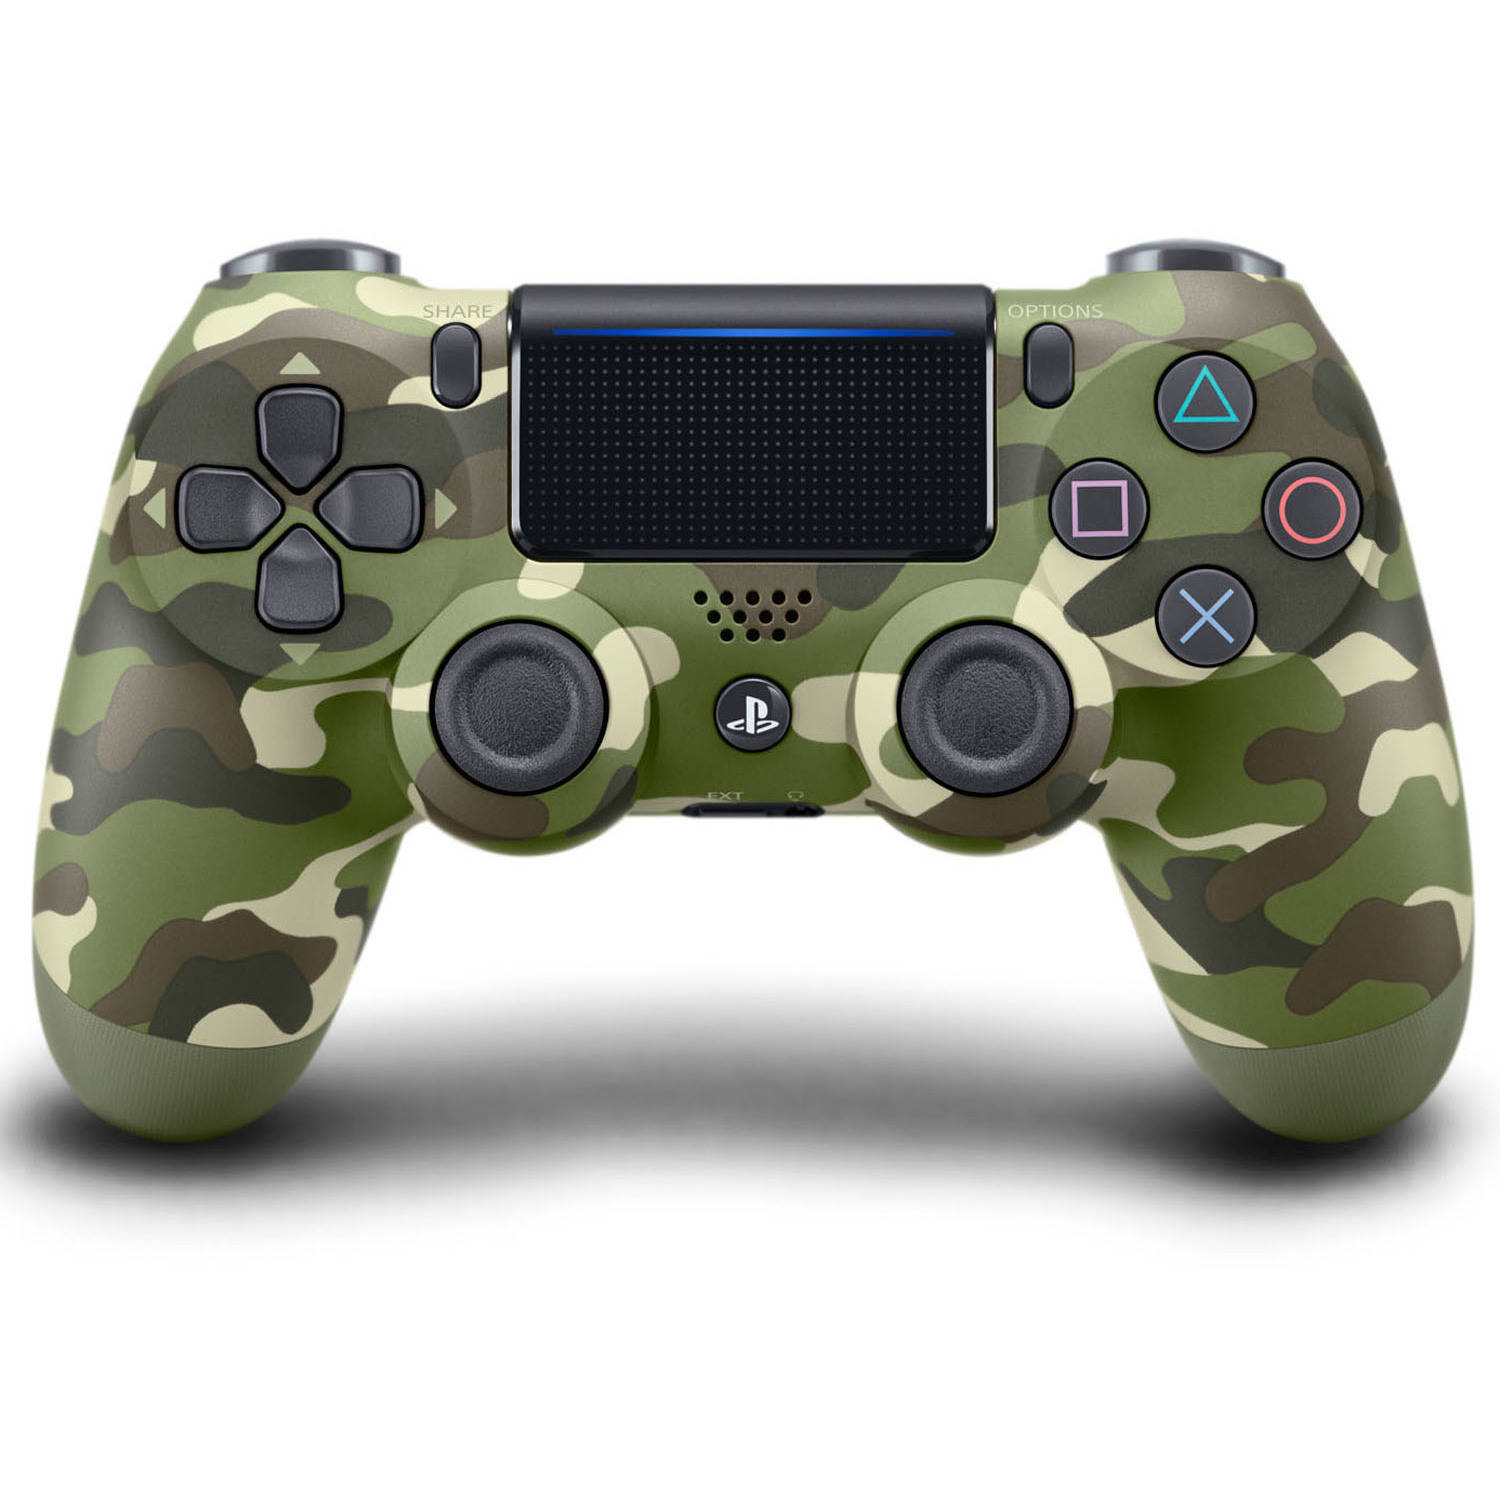 SONY 3001544 PS4 WIRELESS DUALSHOCK CONTROLLER - CAMO GREEN - image 1 of 4